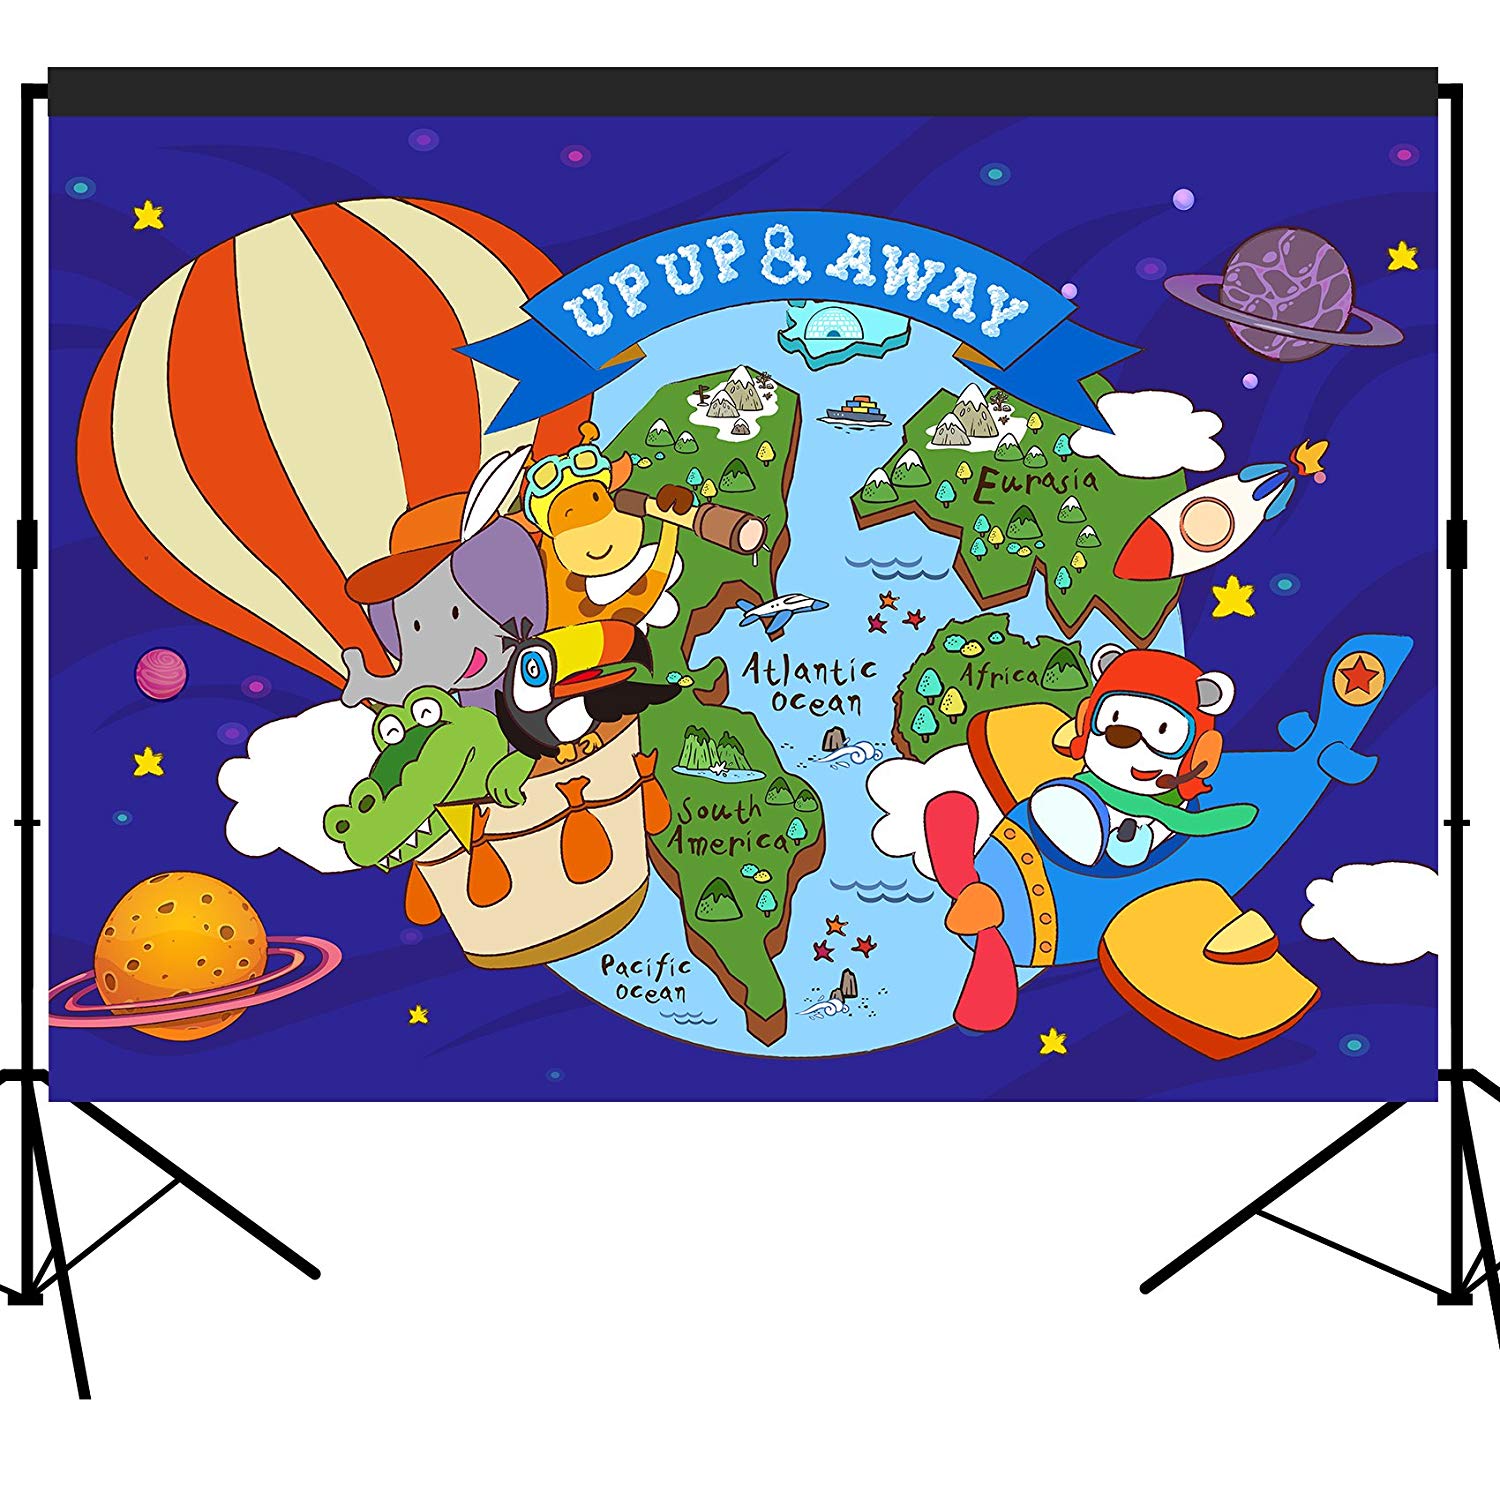 Up and Away Hot Air Balloon and Plane Party Backdrop Large Banner Decoration Dessert Table Background Photobooth Prop 7x5 feet